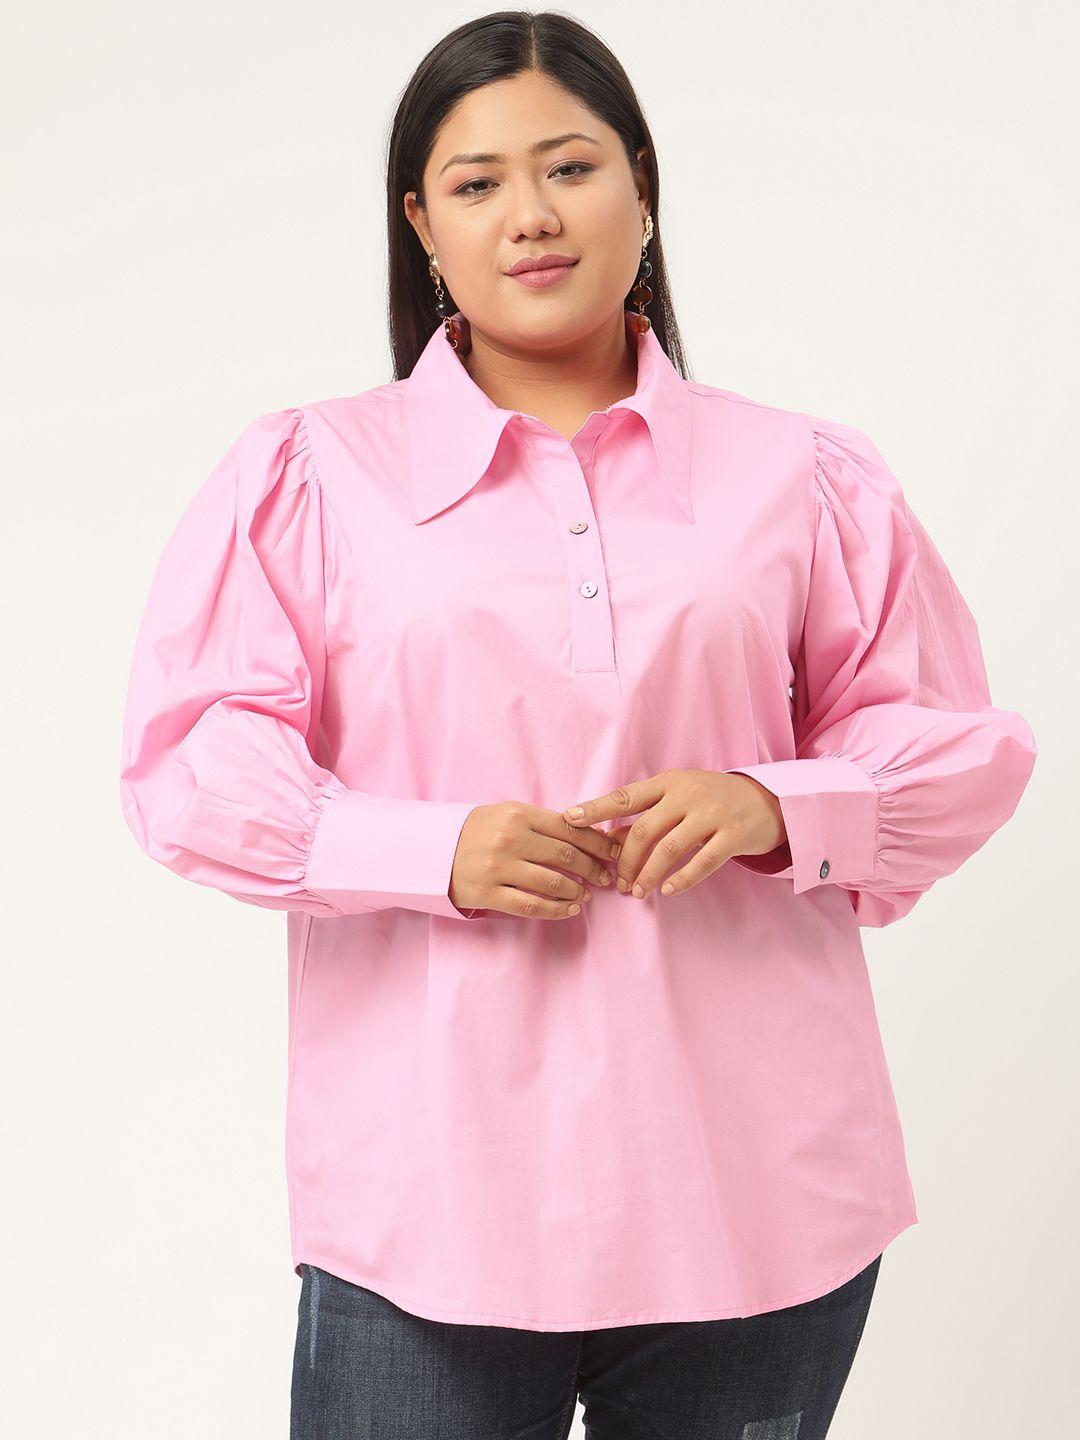 revolution pink shirt style plus size top